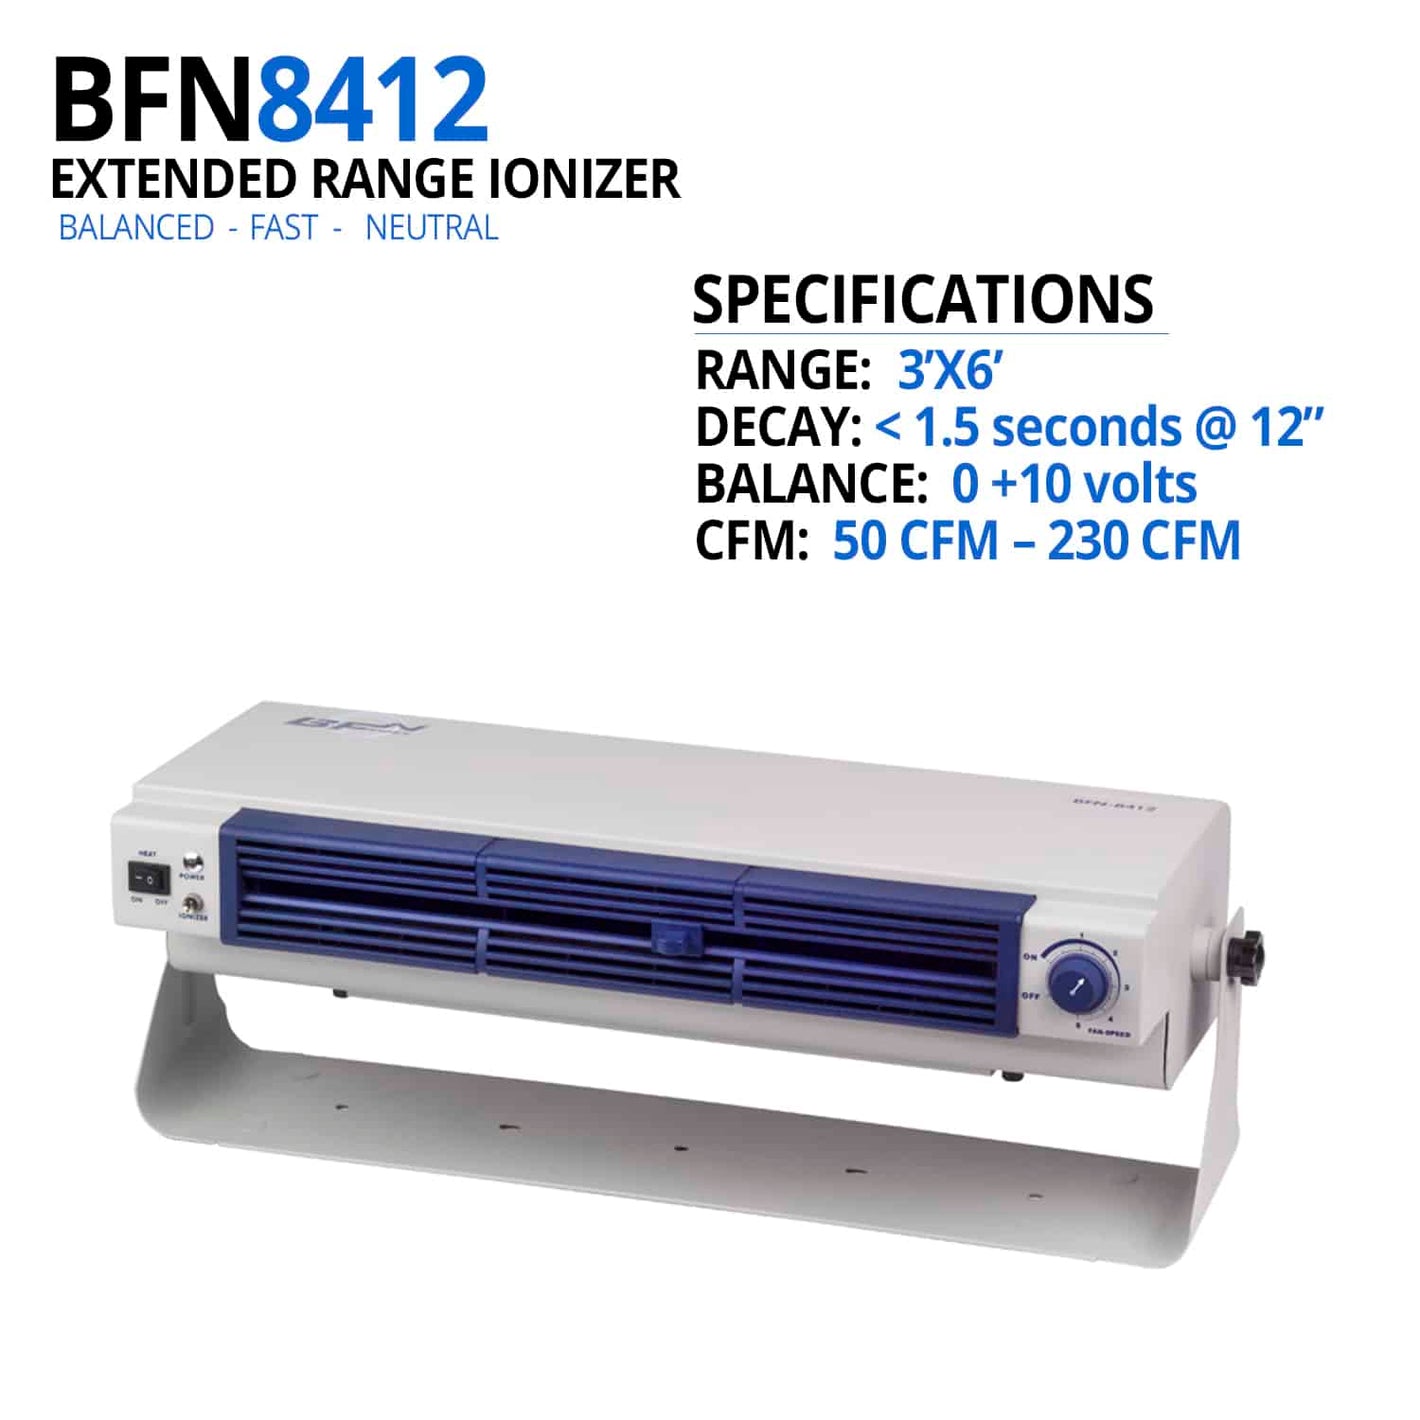 BFN8412 Extended Coverage Bench Top AC Ionizer high speed, consistent static elimination for an extended 3'x6' coverage area